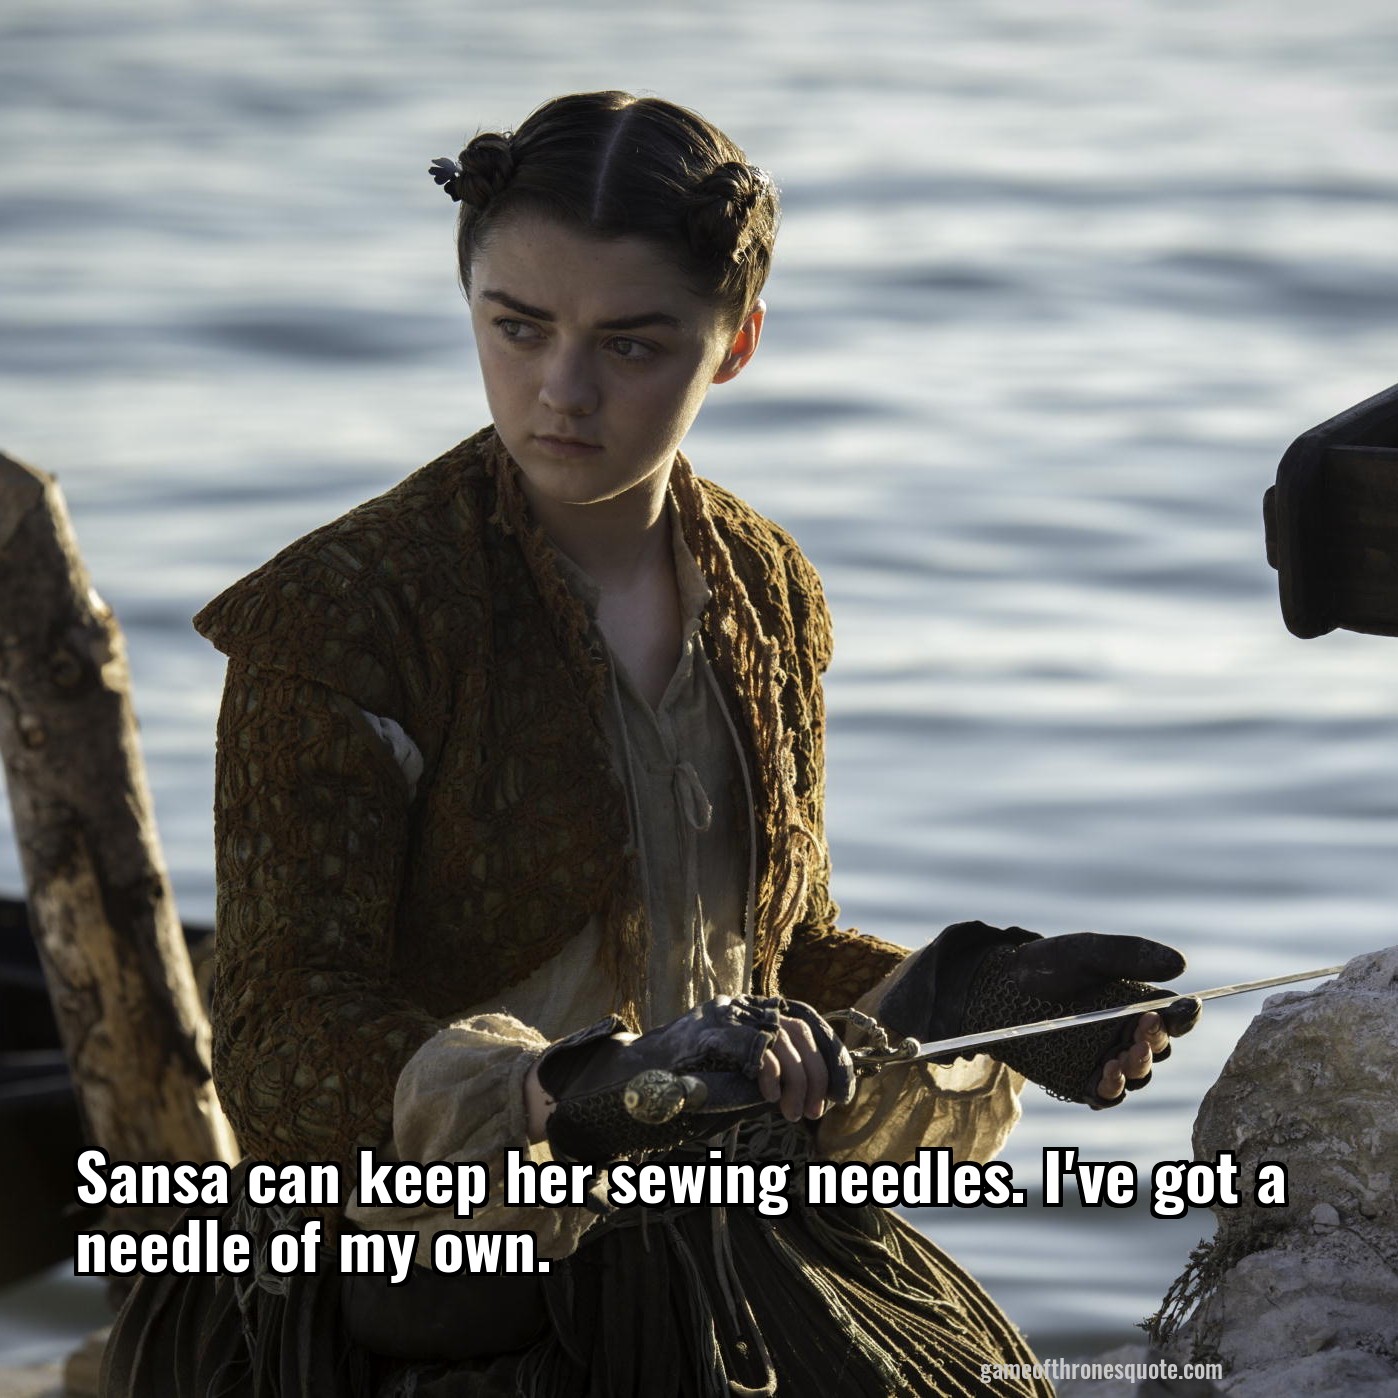 Sansa can keep her sewing needles. I've got a needle of my own.